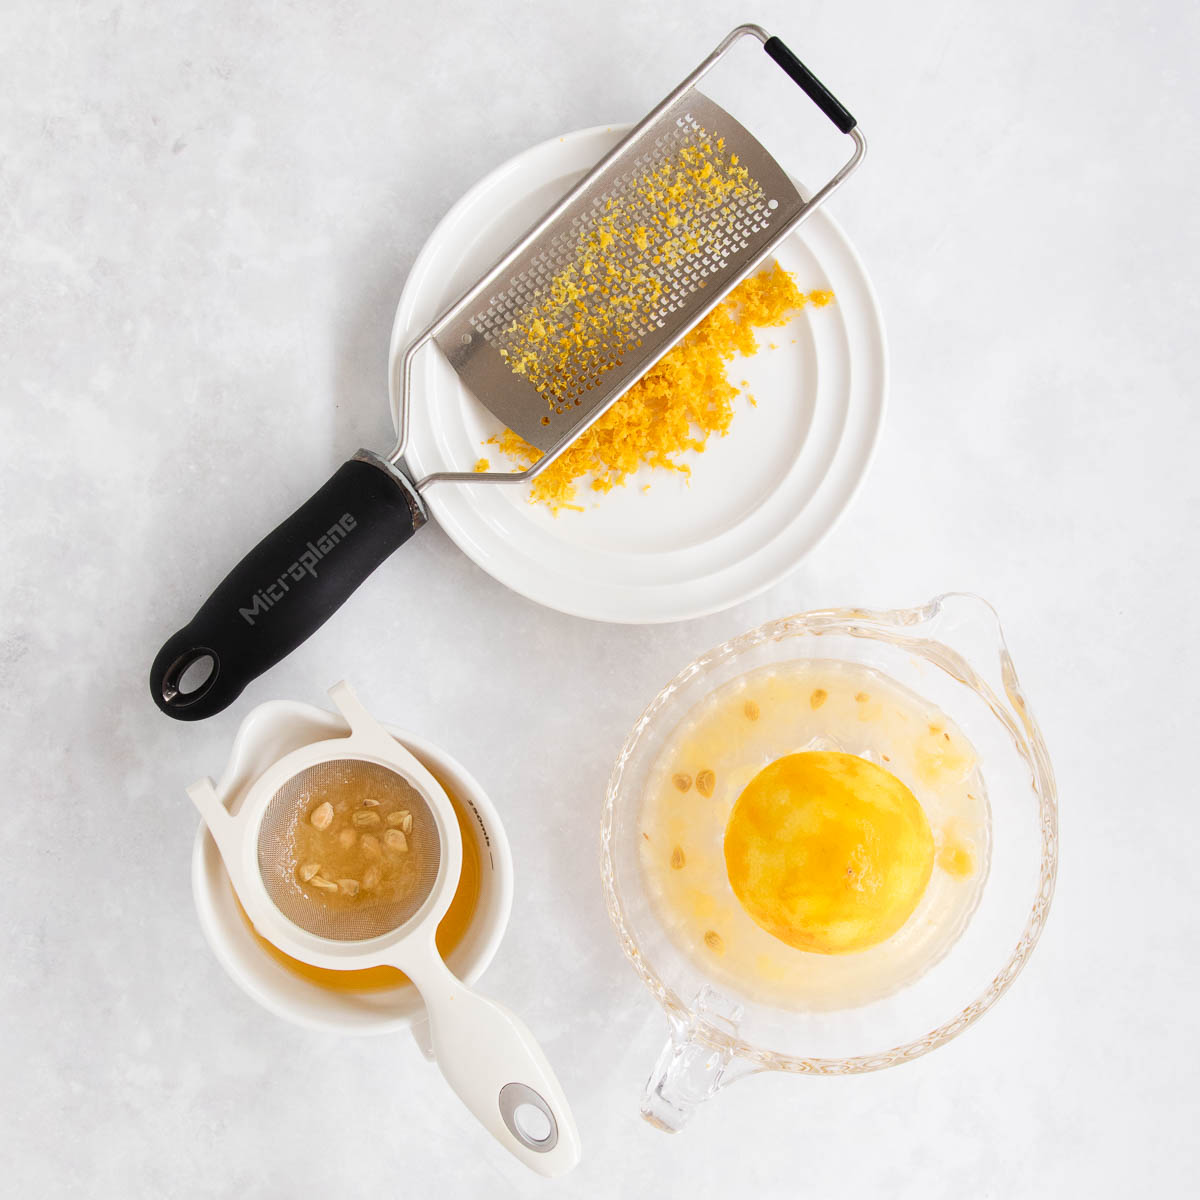 Lemon zest on a white plate with a microplane grater, and a glass lemon juicer with a juiced lemon, on a grey marble background.